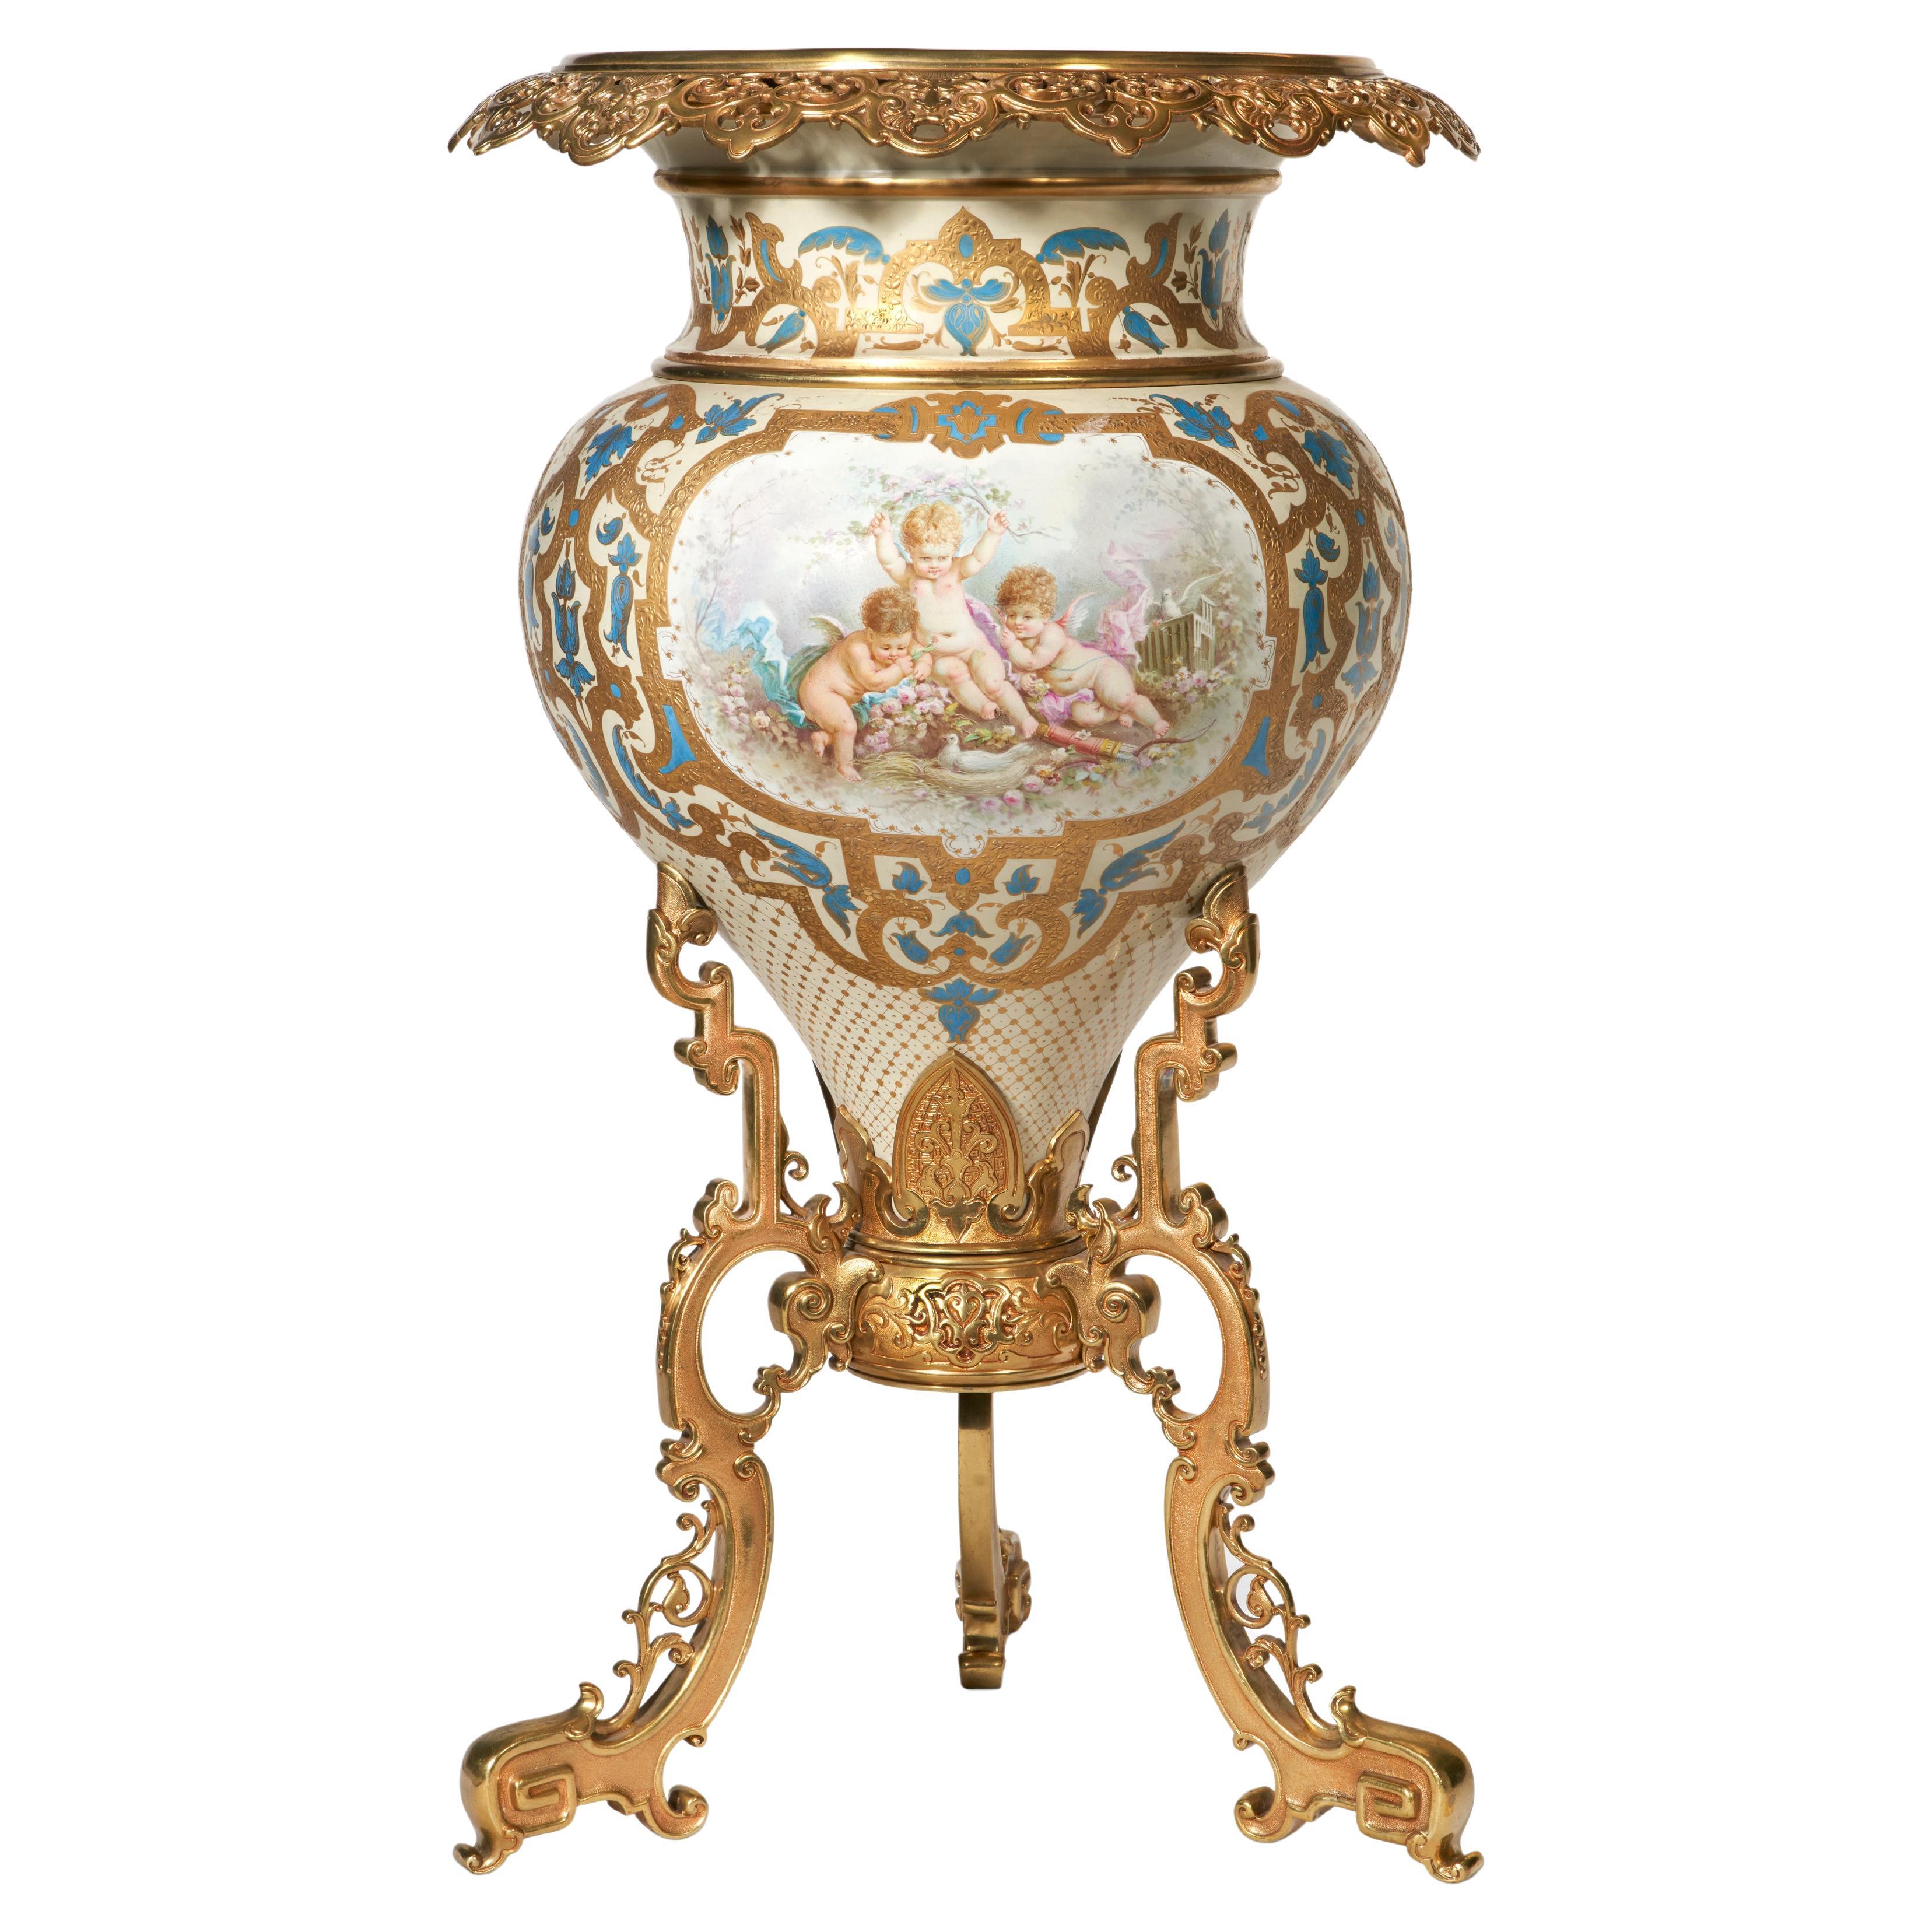 Large & Important French 19th C. Sevres Porcelain Ormolu Mounted Jardiniere For Sale